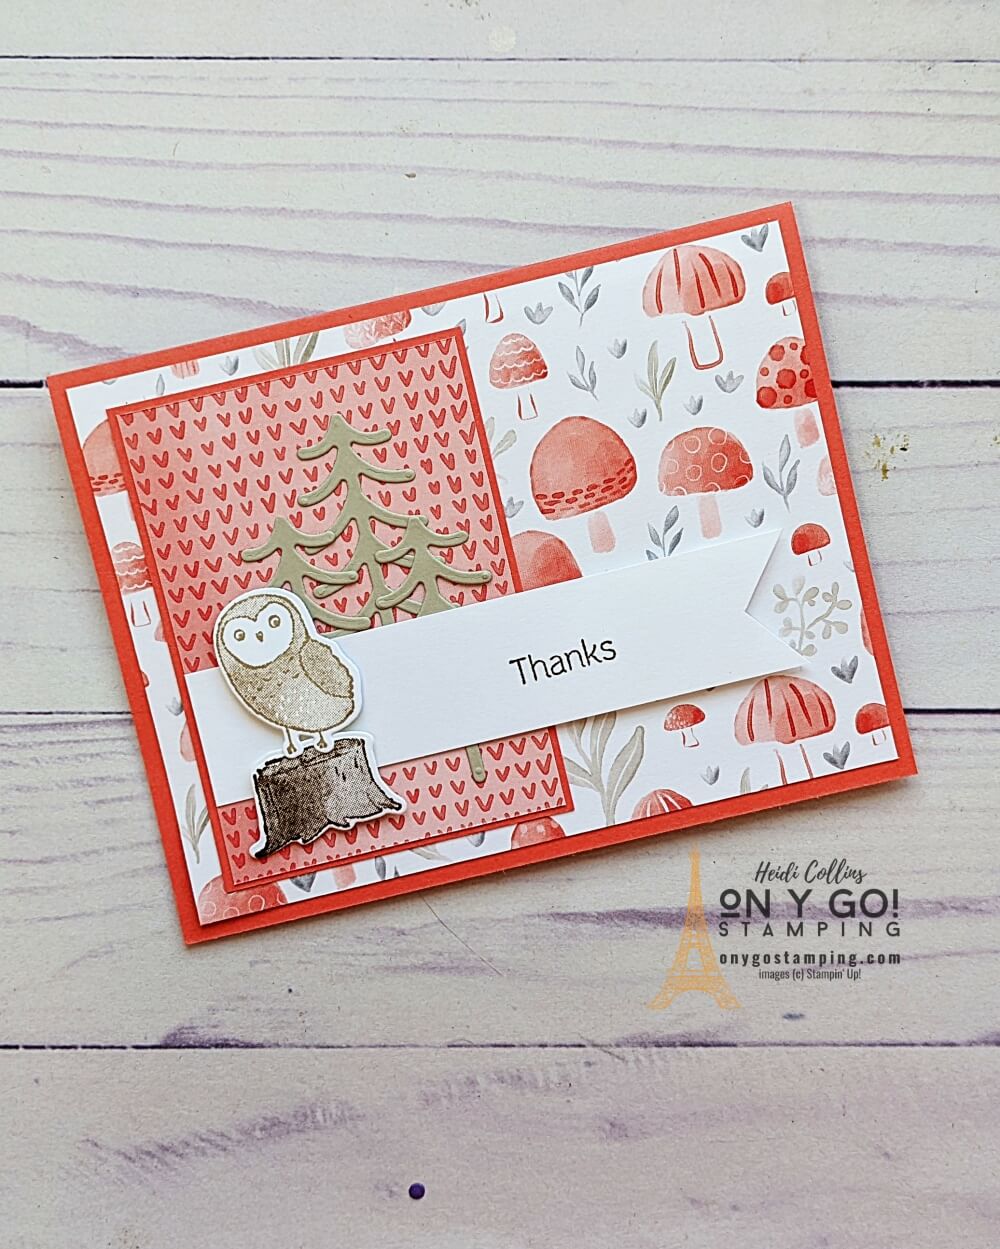 Handmade thank you card design with the Happier Than Happy stamp set from Stampin' Up!® This card is based on a simple card sketch. Get the free downloadable quick reference guide for this card sketch.